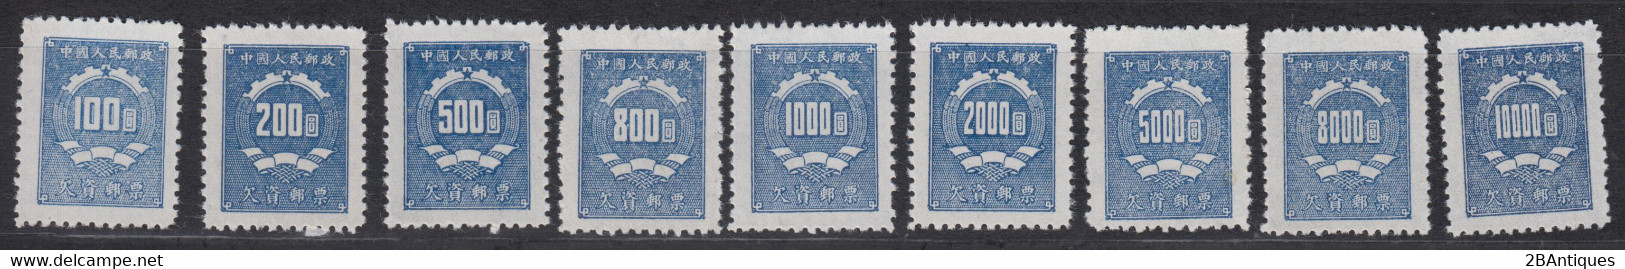 PR China 1950 - Postage Due Stamps COMPLETE SET MNH** XF - Impuestos